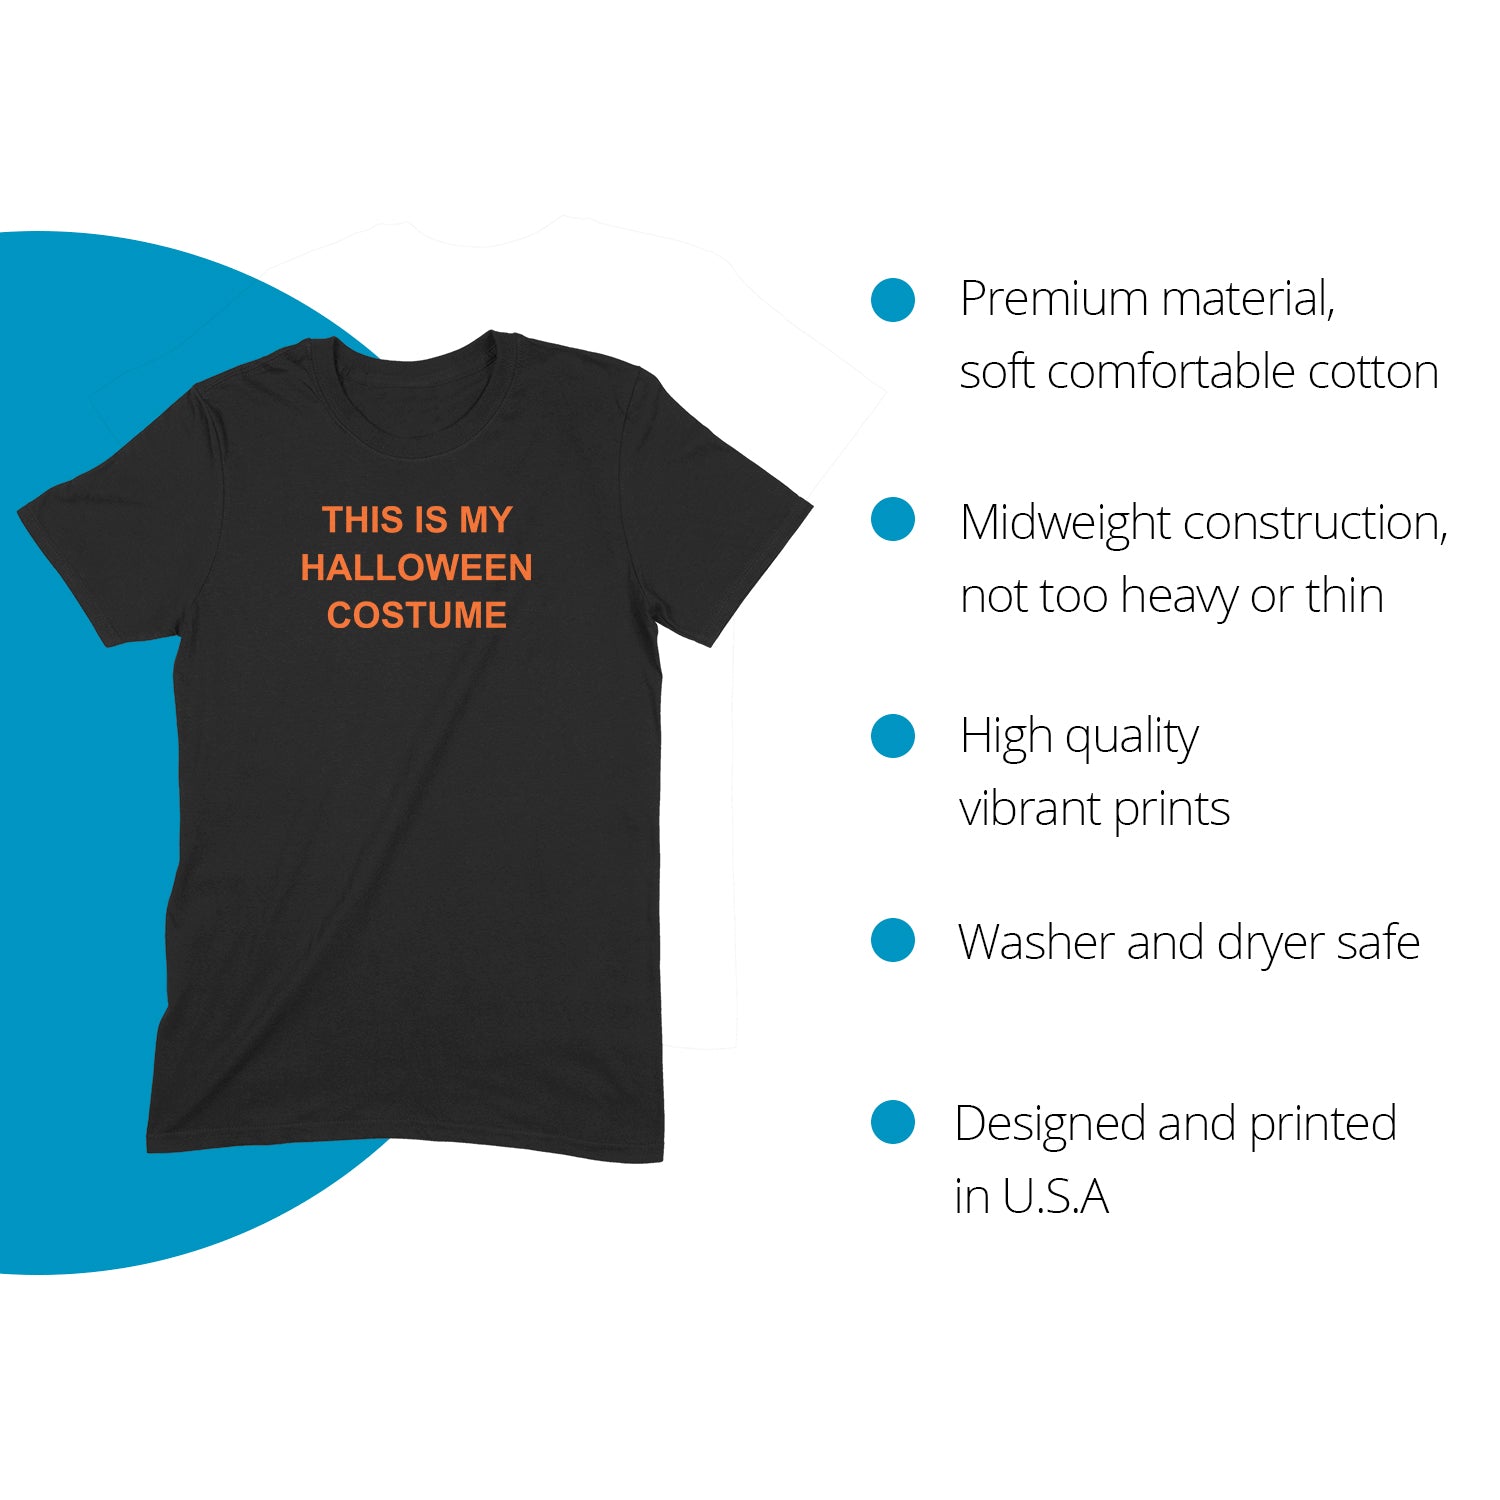 "This Is My Halloween Costume" Premium Midweight Ringspun Cotton T-Shirt - Mens/Womens Fits